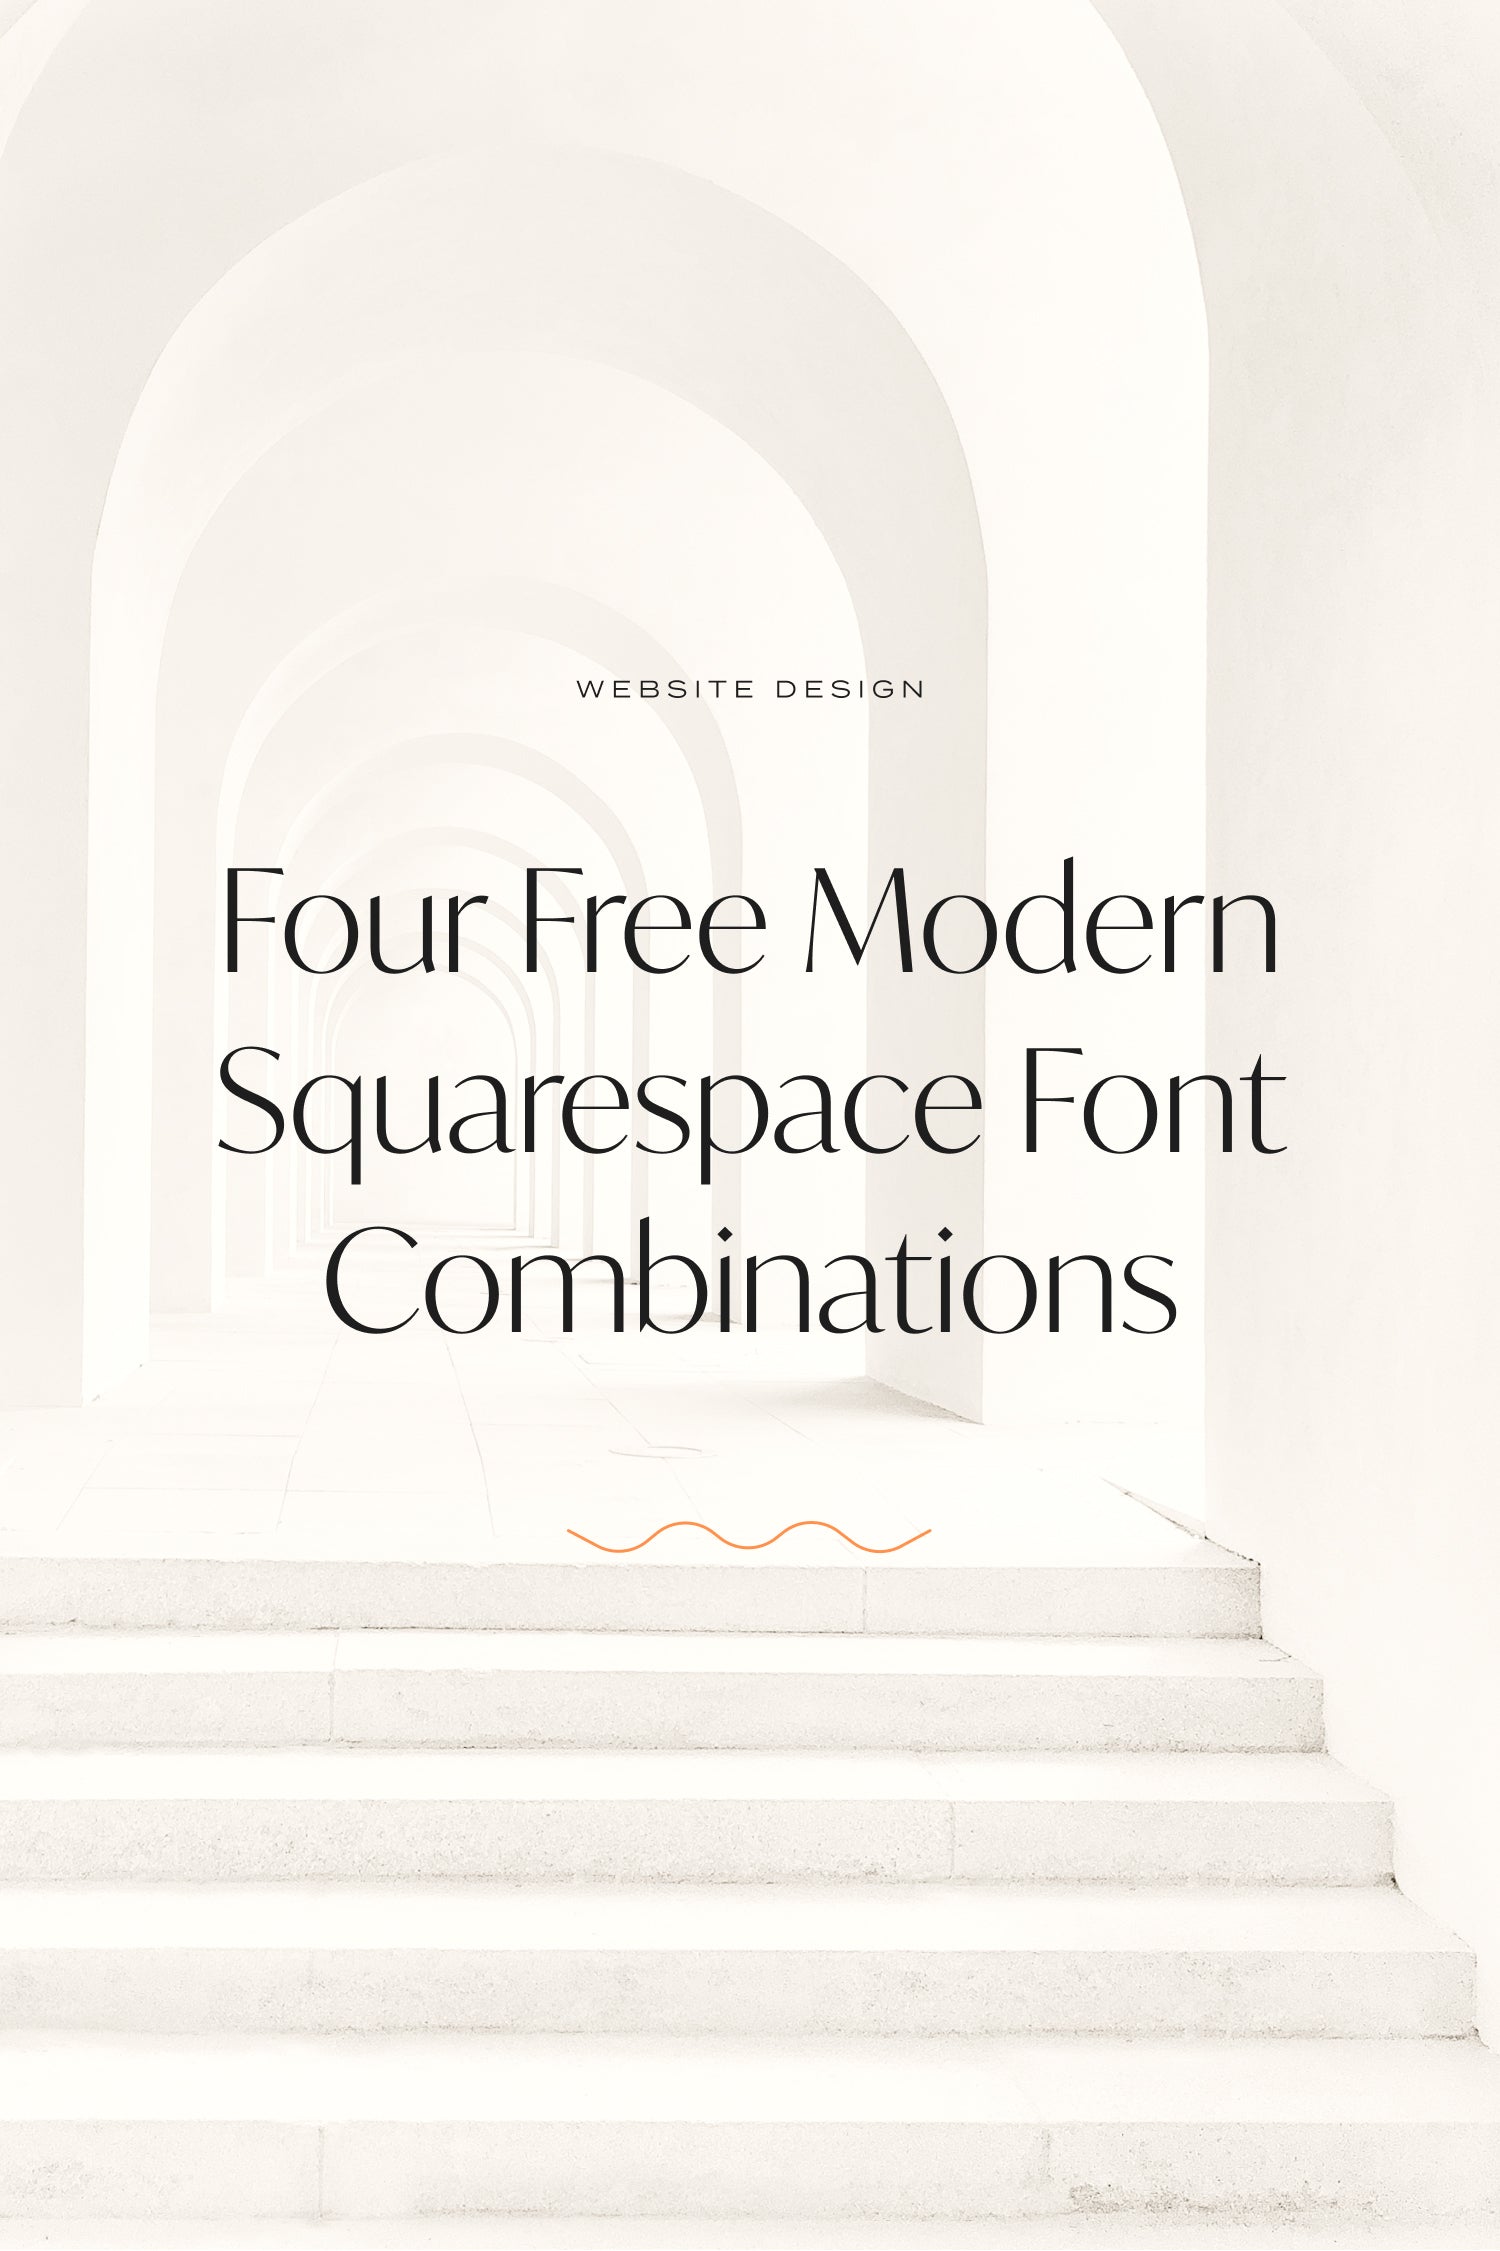 Four Free Modern Squarespace Font Combinations